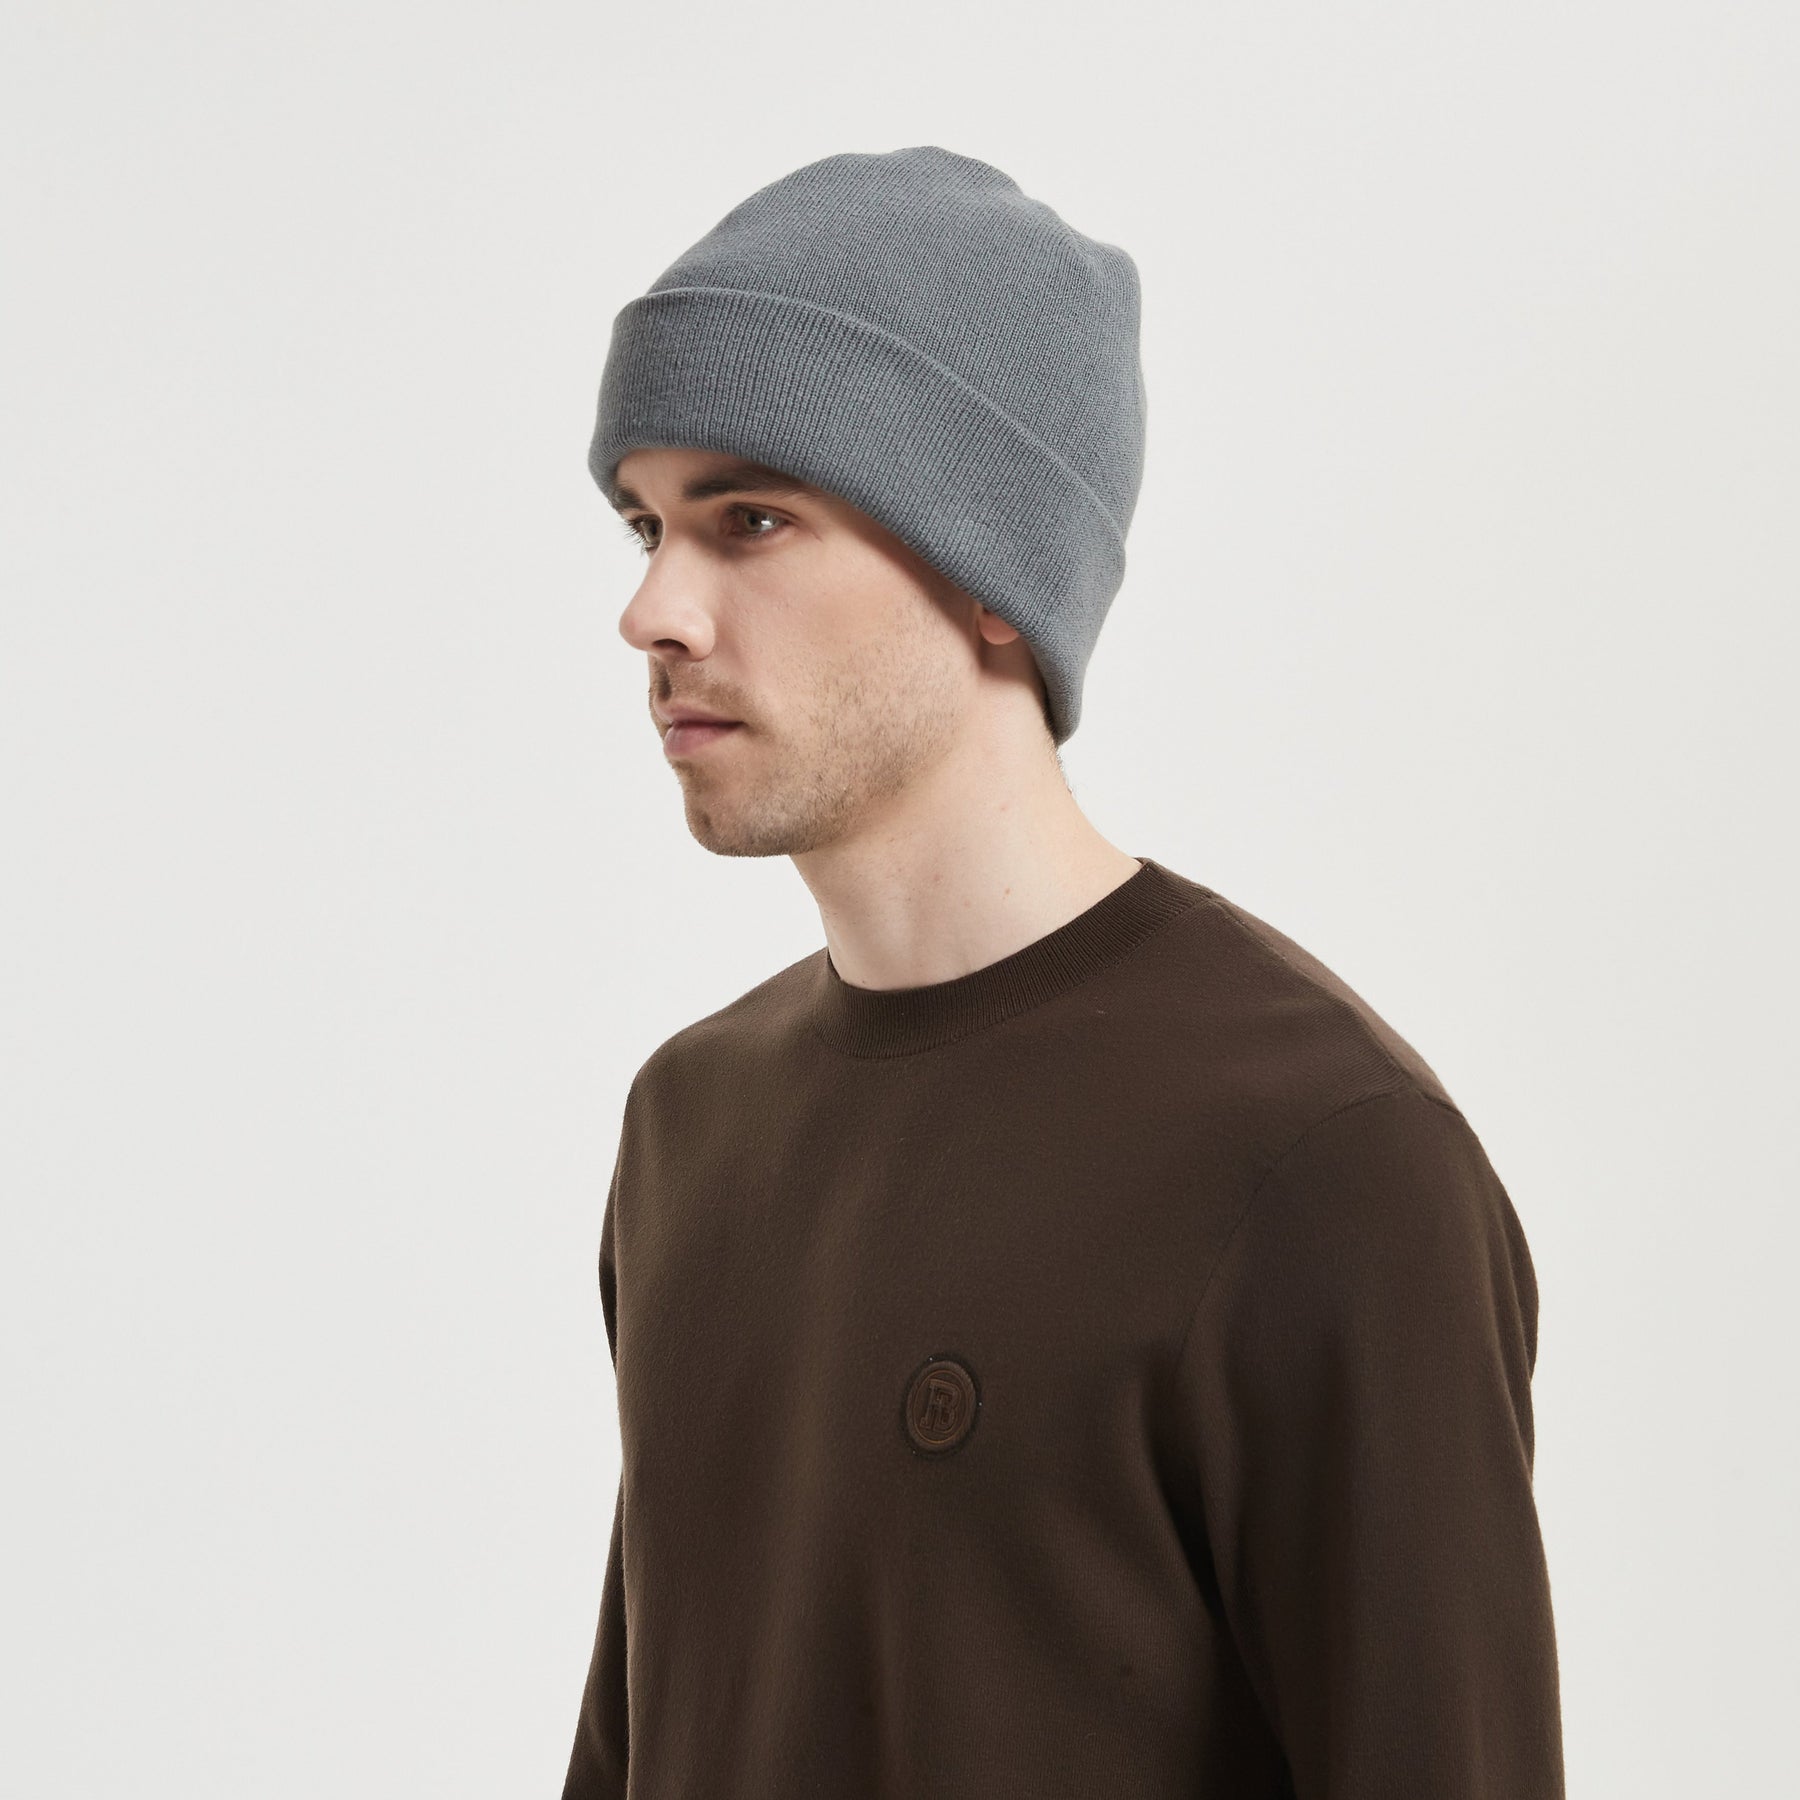 Men with a grey clor radiation proof winter beanie, side view